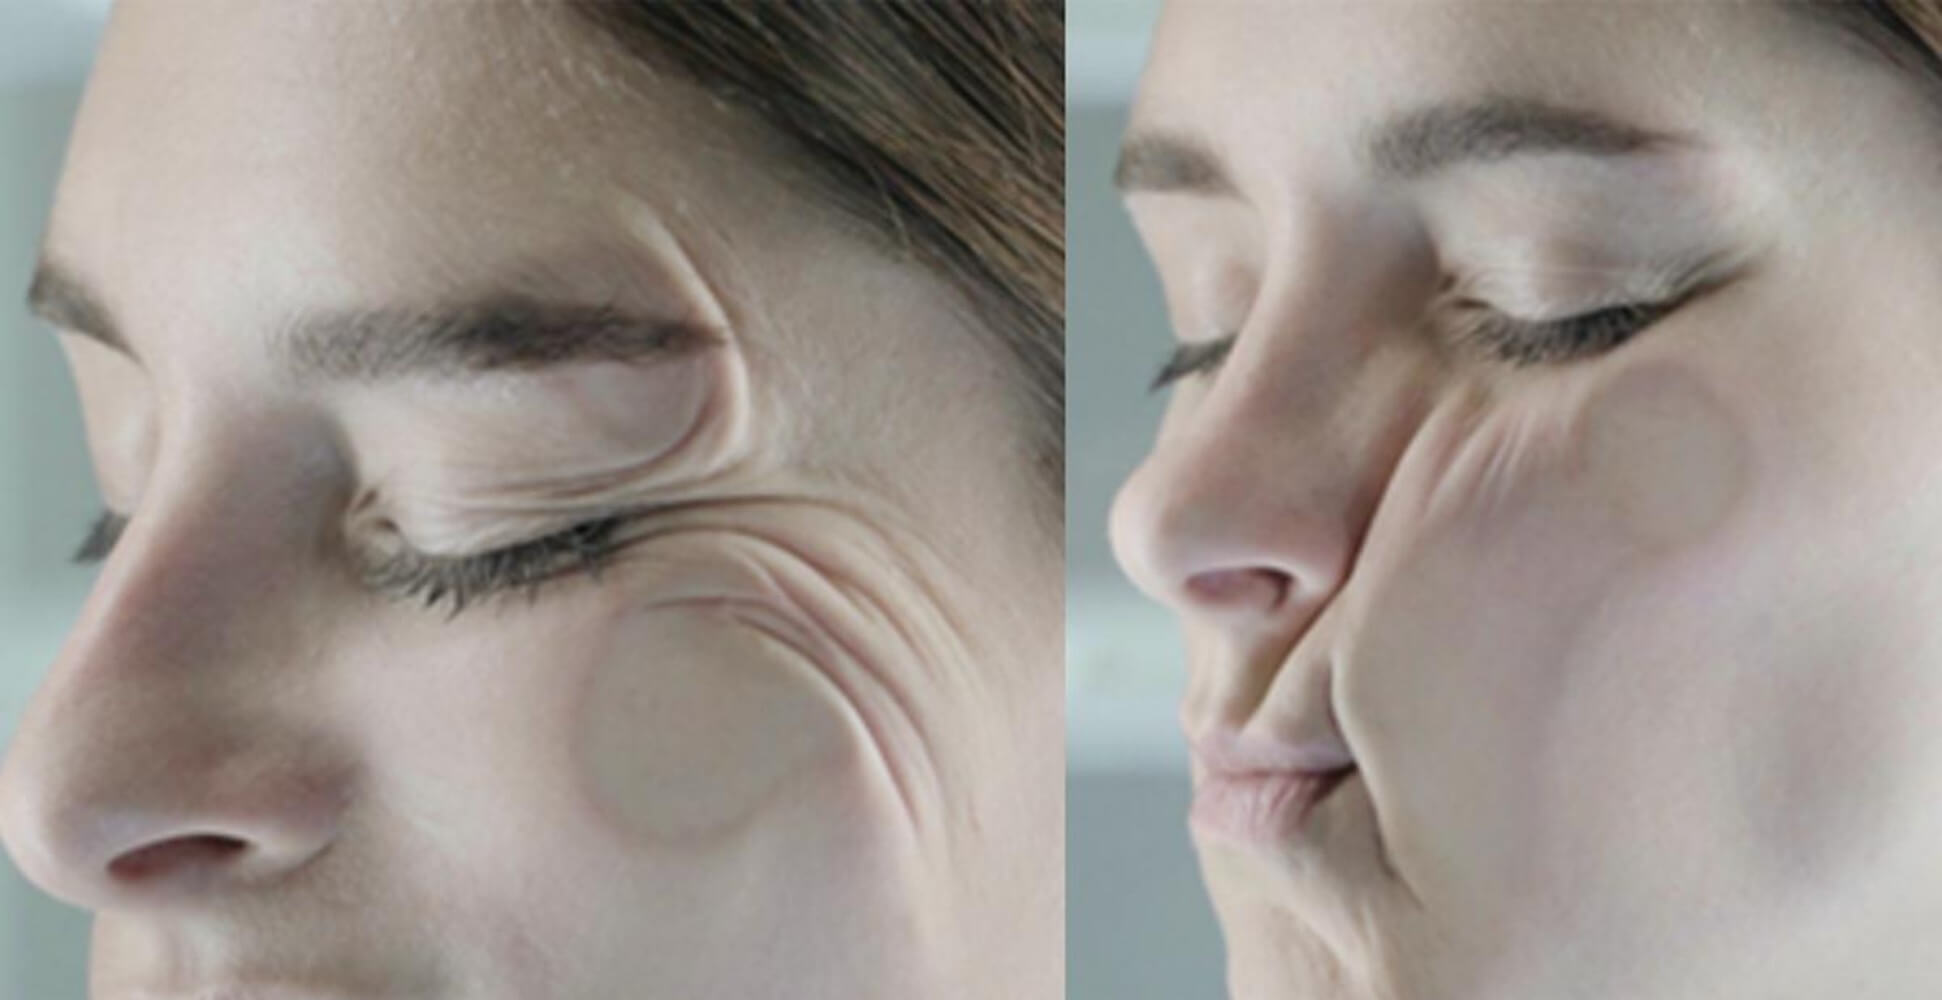 A models wrinkled face after using a normal pillow.